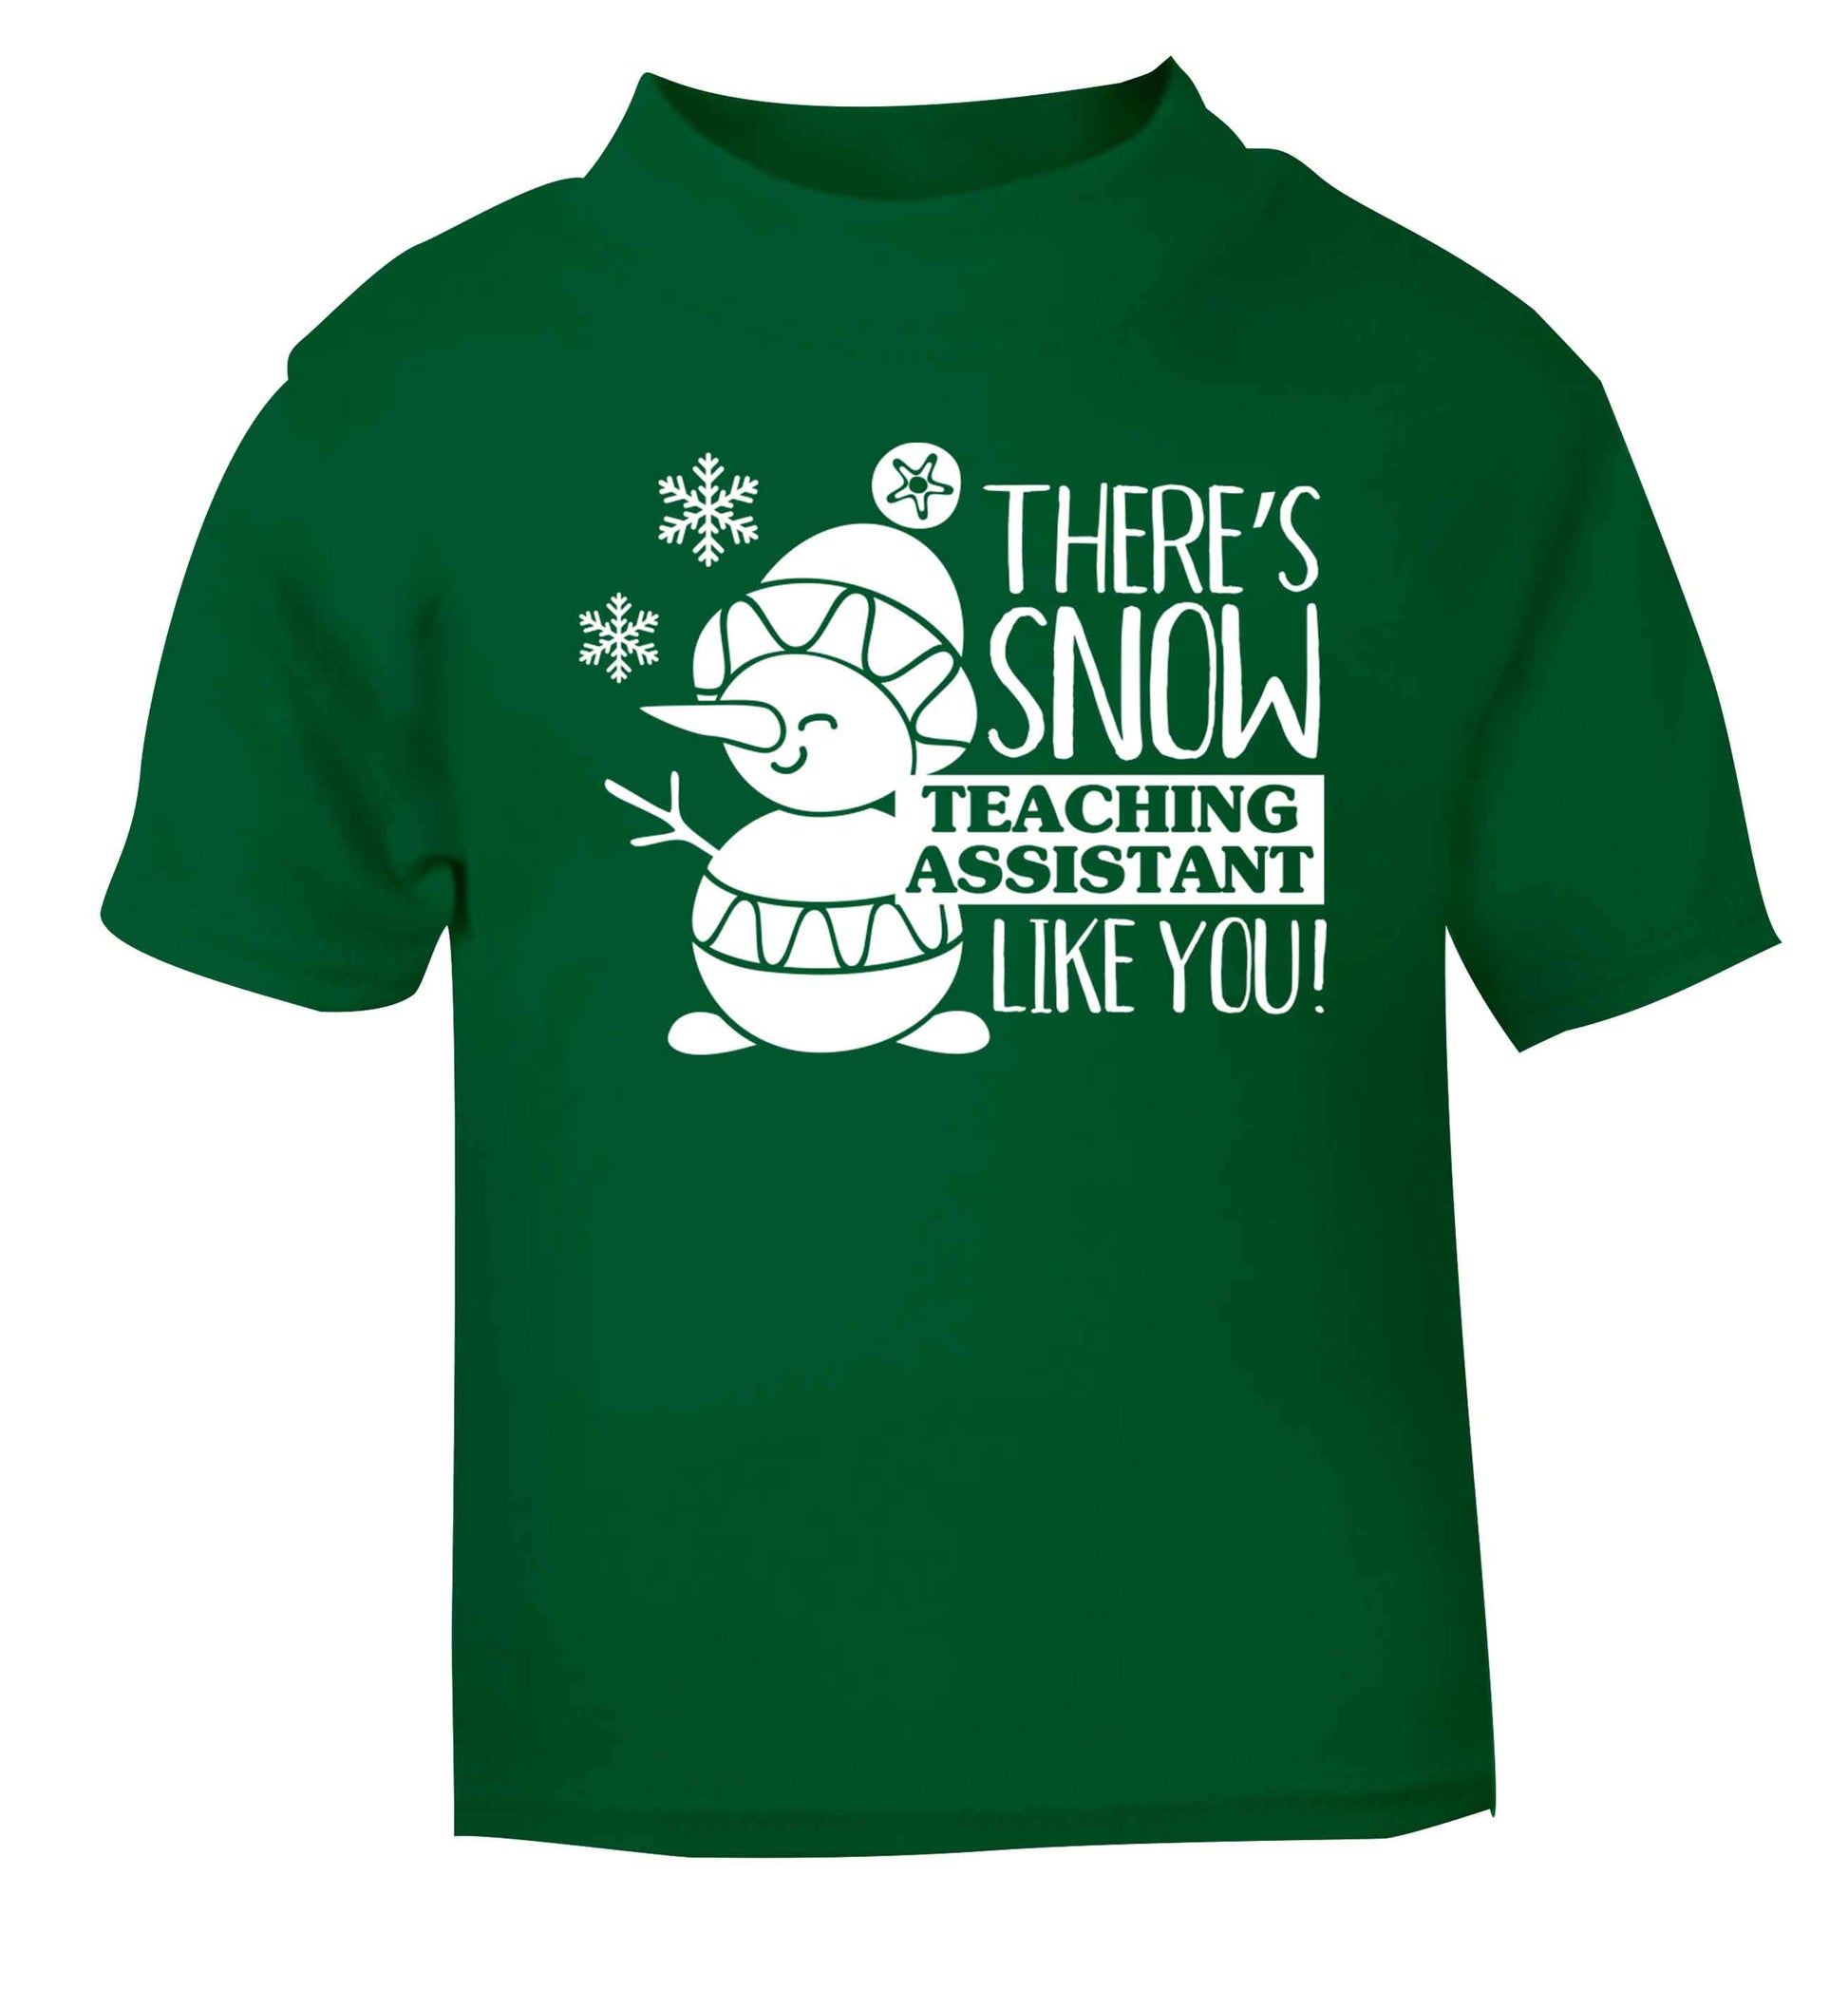 There's snow teaching assistant like you green baby toddler Tshirt 2 Years